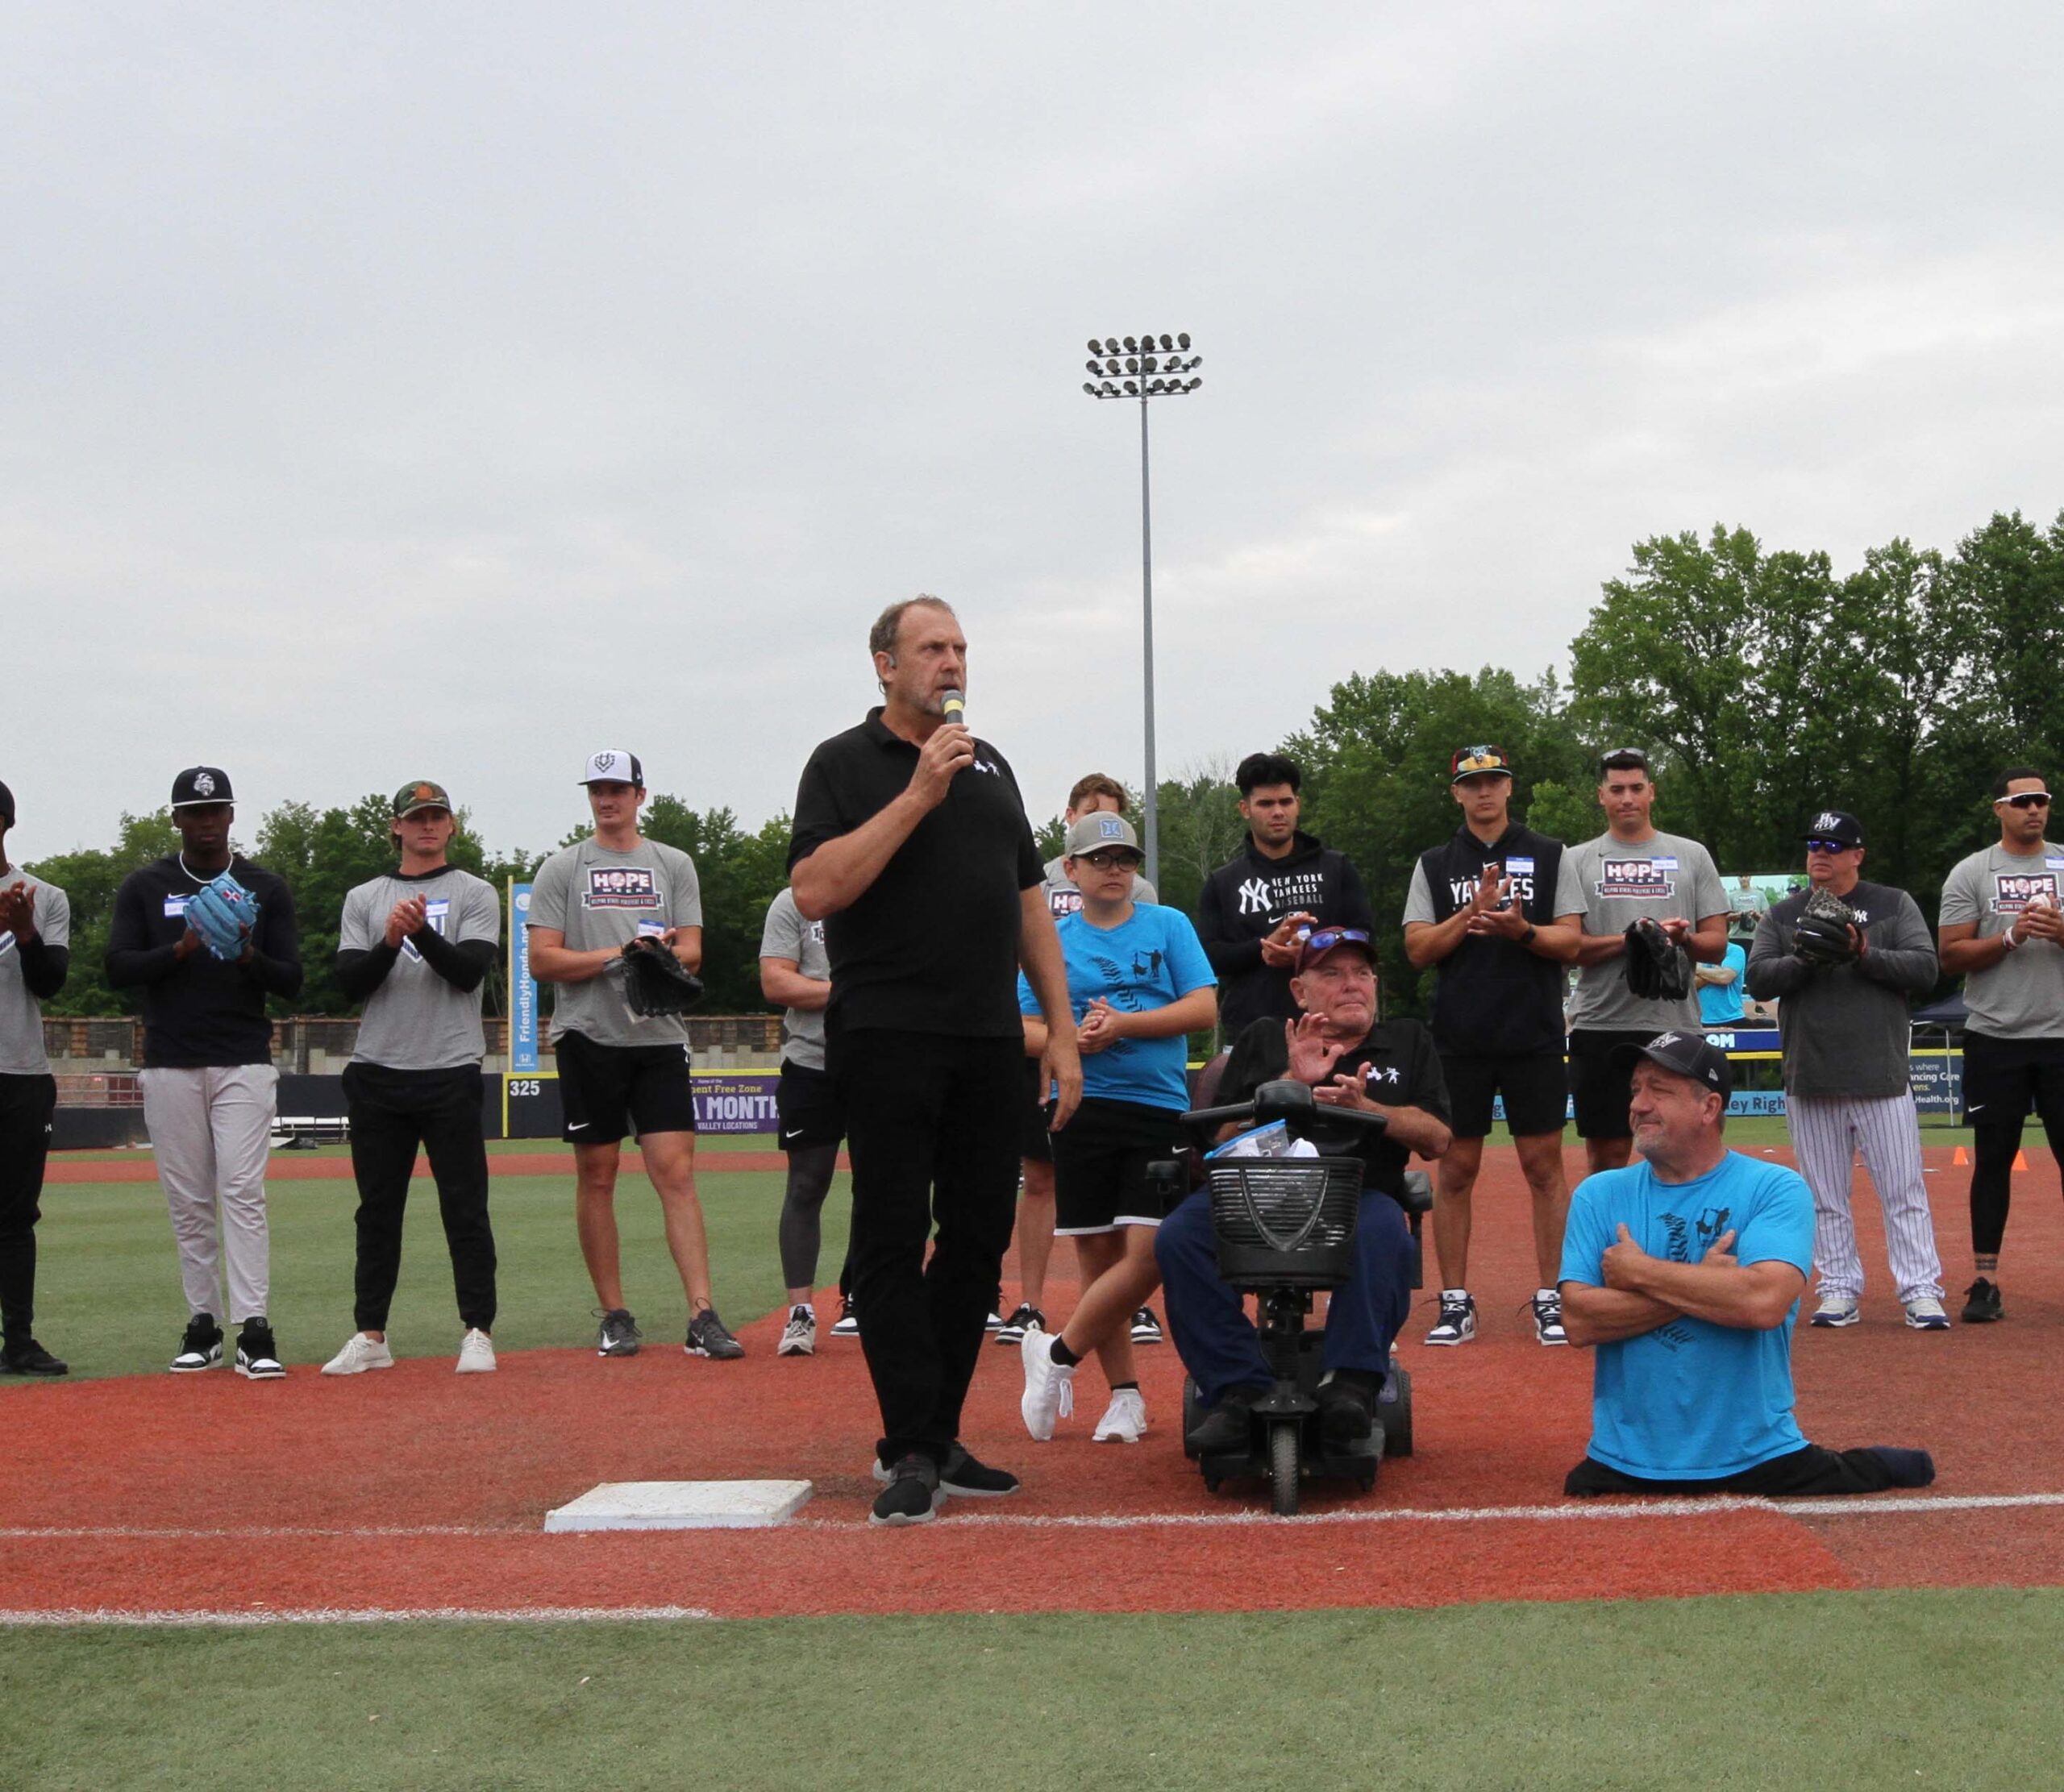 Doug Cornfield of The Dave Clark Foundation and Pulling Each Other Along, addresses the crowd of the D-3 Day with former MLB Pitcher Dave Clark (seated on an electric scooter) to his right, and Dave Stevens, to the far right, sitting/standing on the ground. Behind the gentlemen are members of the Hudson Valley Renegades. Disability, Dream and Do (also known as D3 Day) at Heritage Financial Field, June 17, 2023.